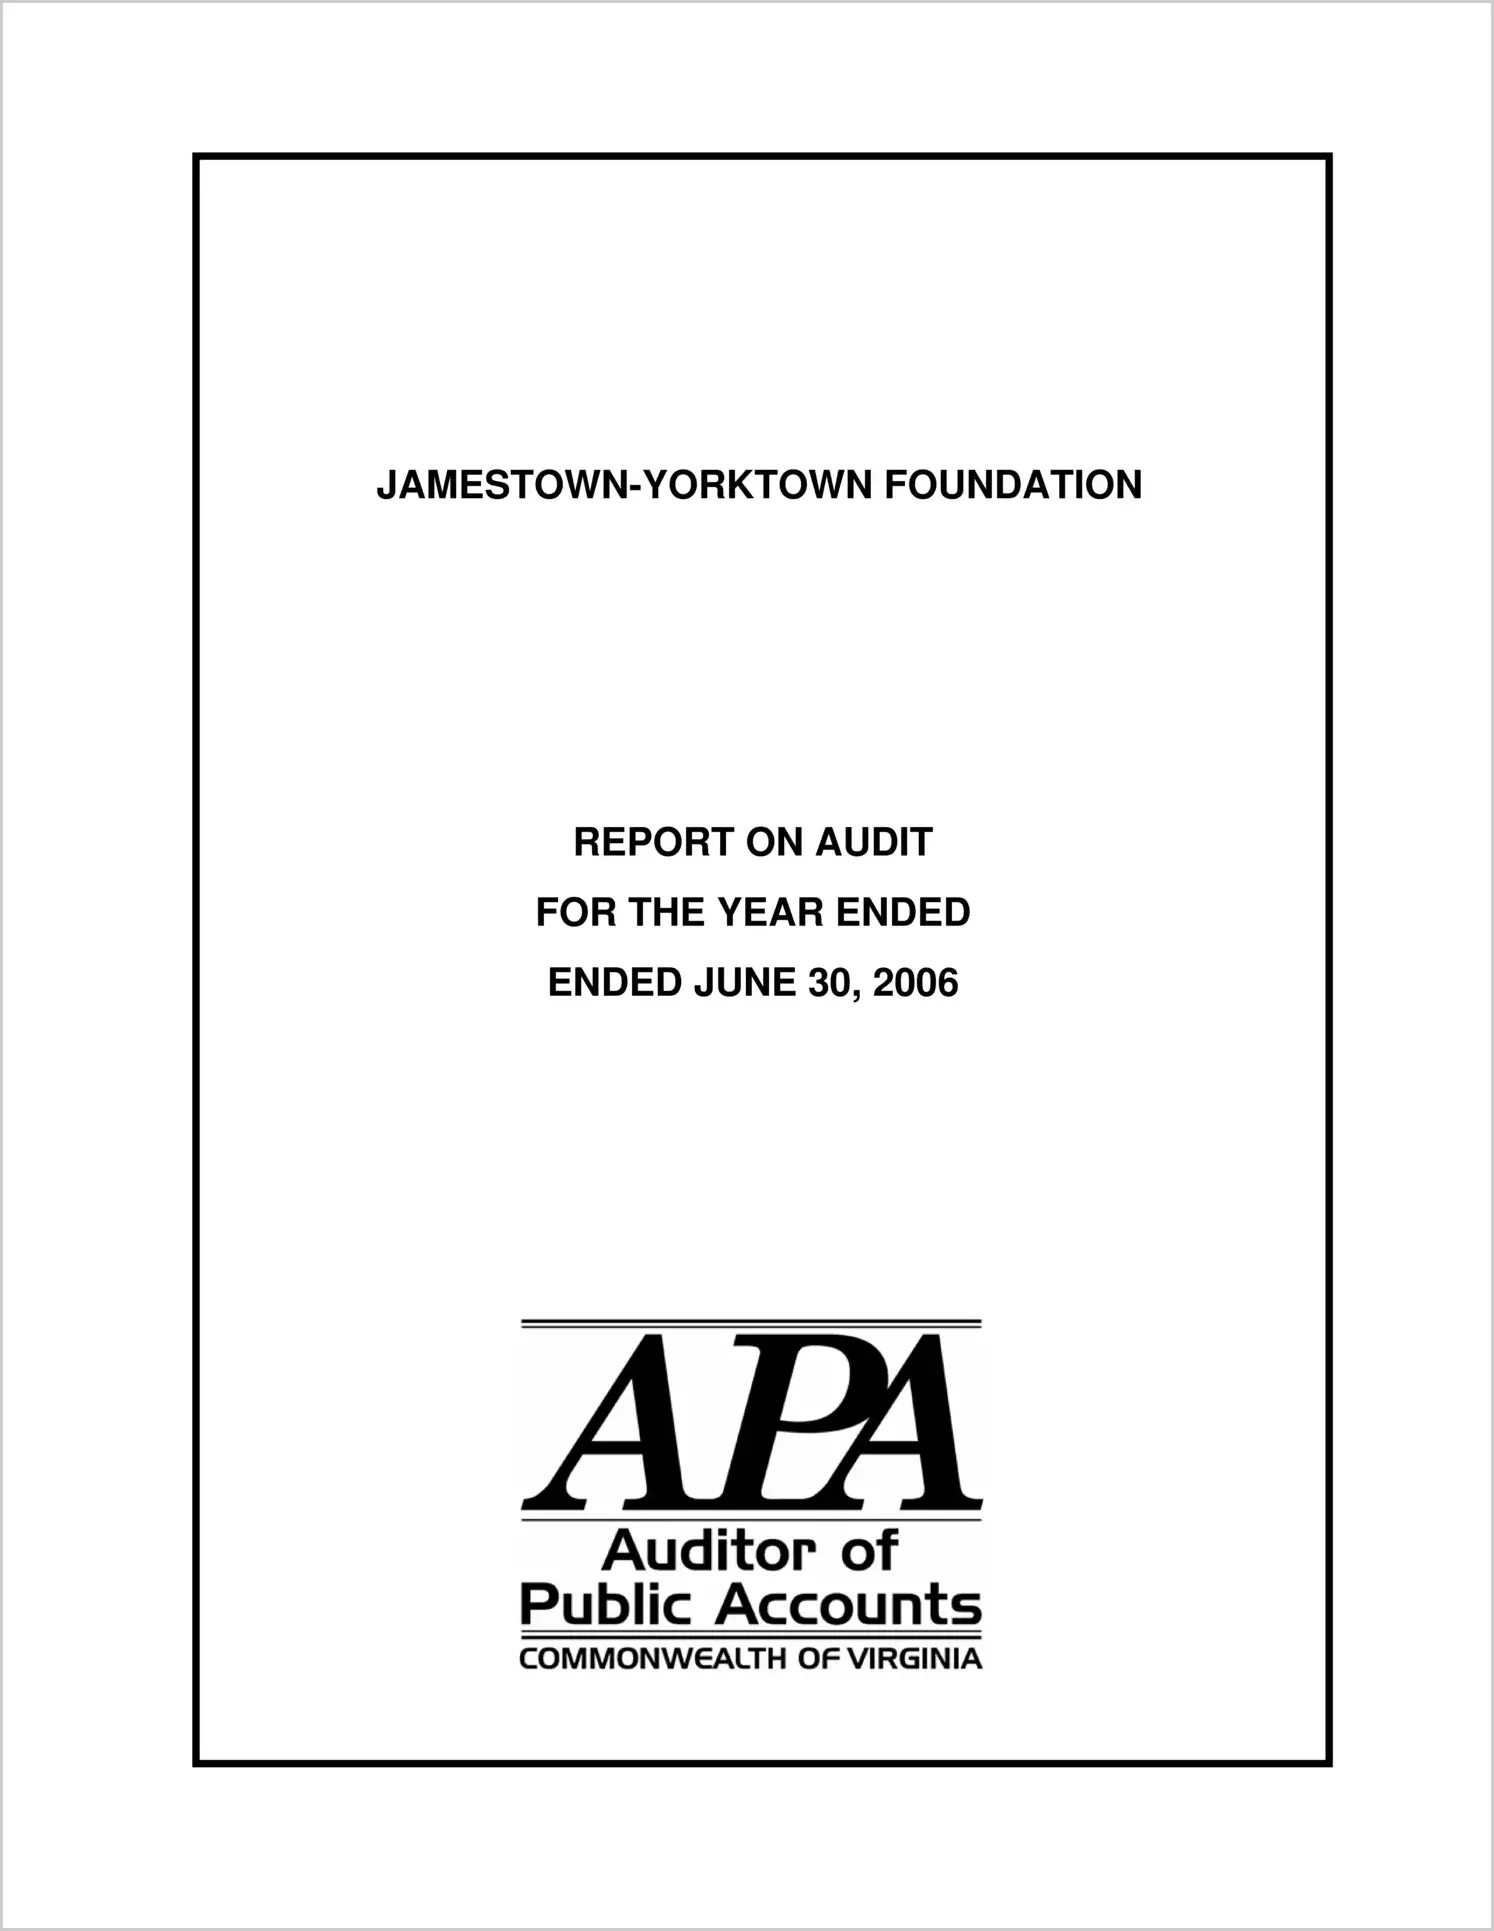 Jamestown-Yorktown Foundation for the year ended June 30, 2006